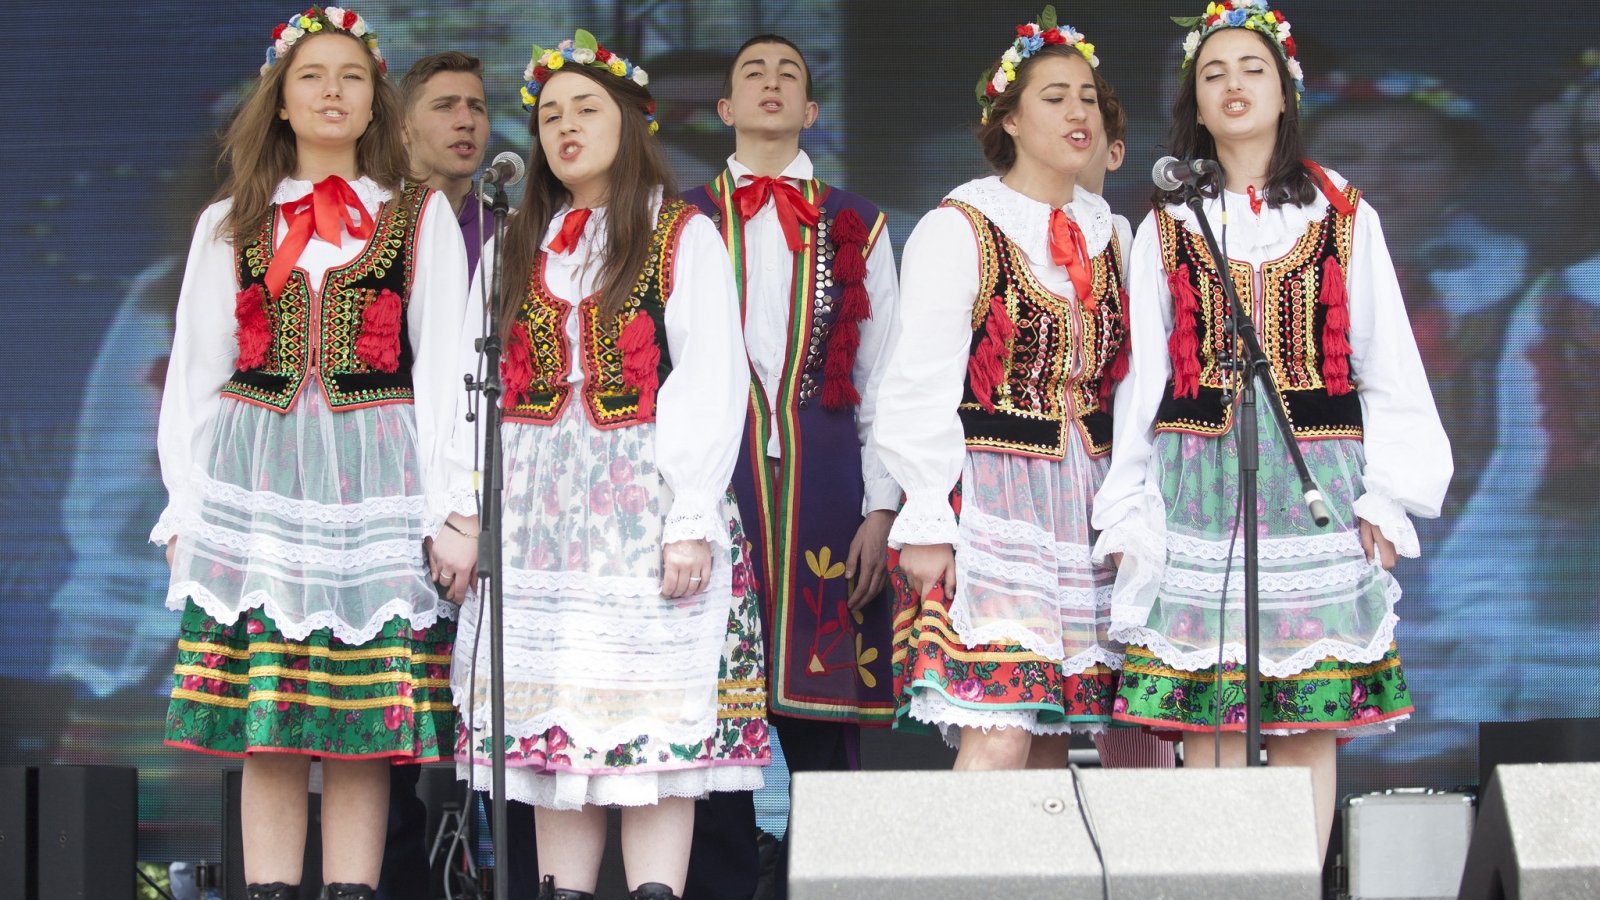 Media prize for showcasing cultural diversity in Eastern Europe – call for applications